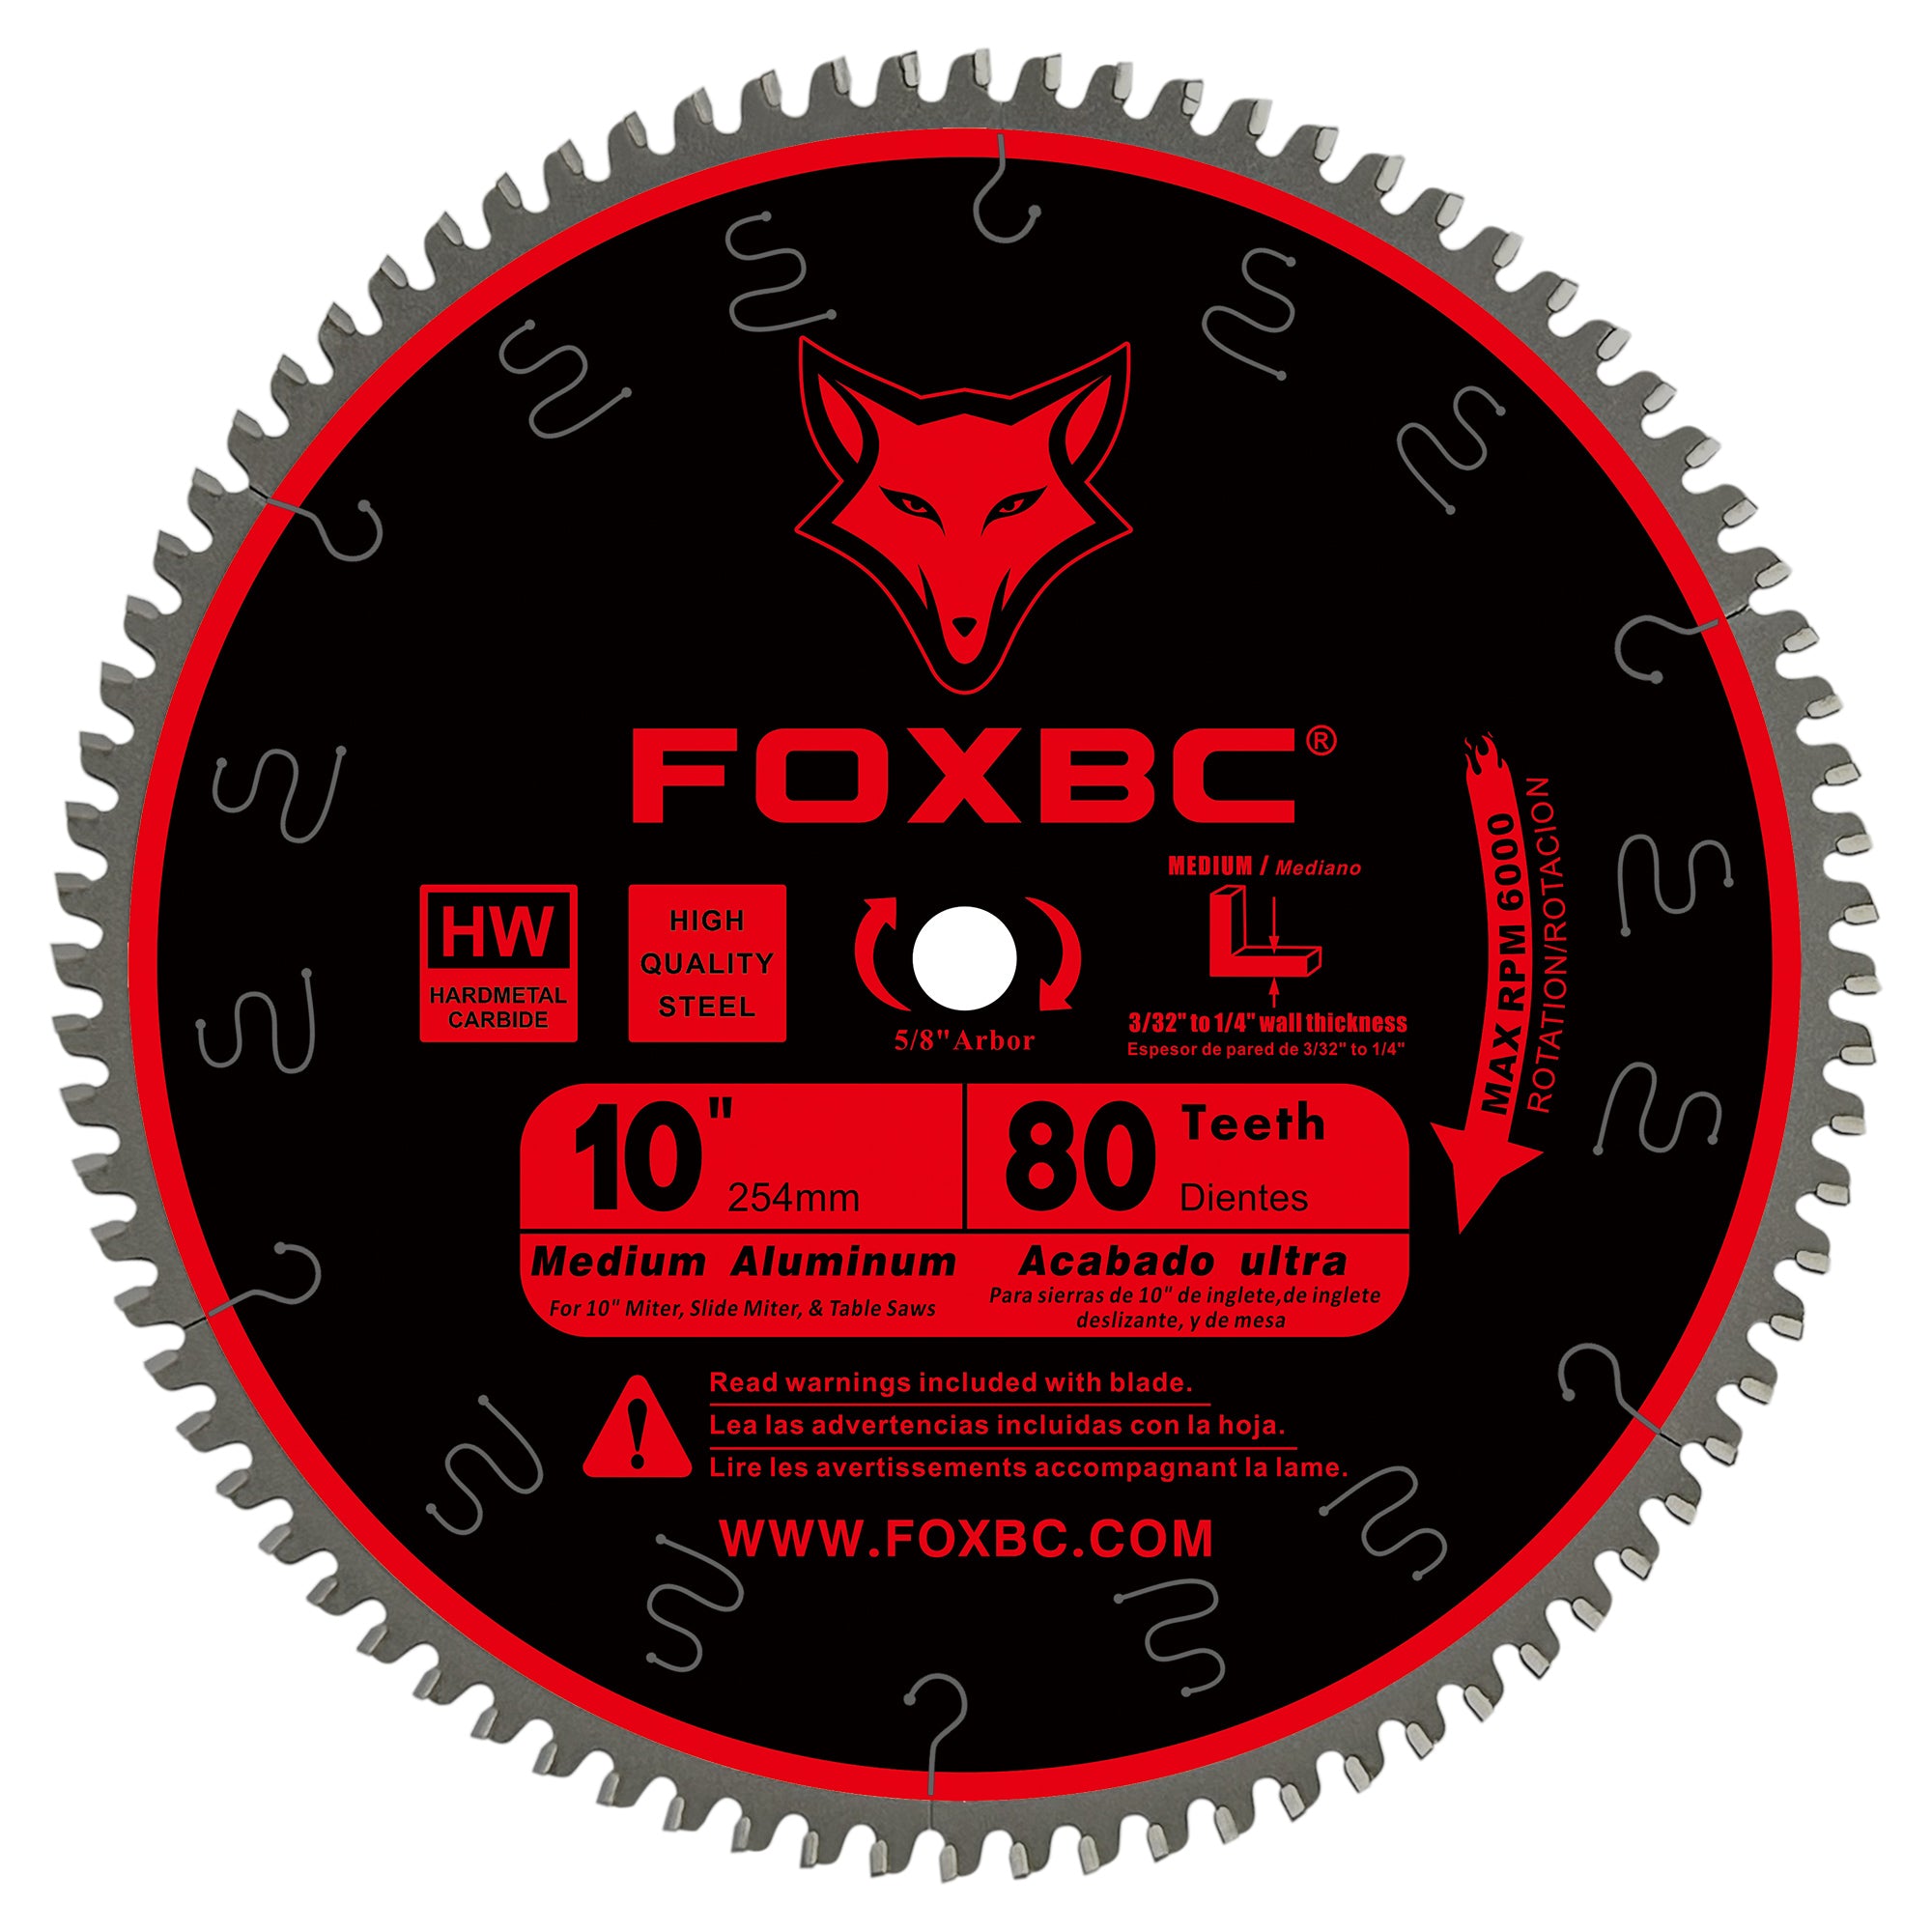 FOXBC 10-Inch Miter/Table Saw Blade 80-Tooth TCG for Aluminum and Non-Ferrous Metal & Plastic Cutting with 5/8-Inch Arbor